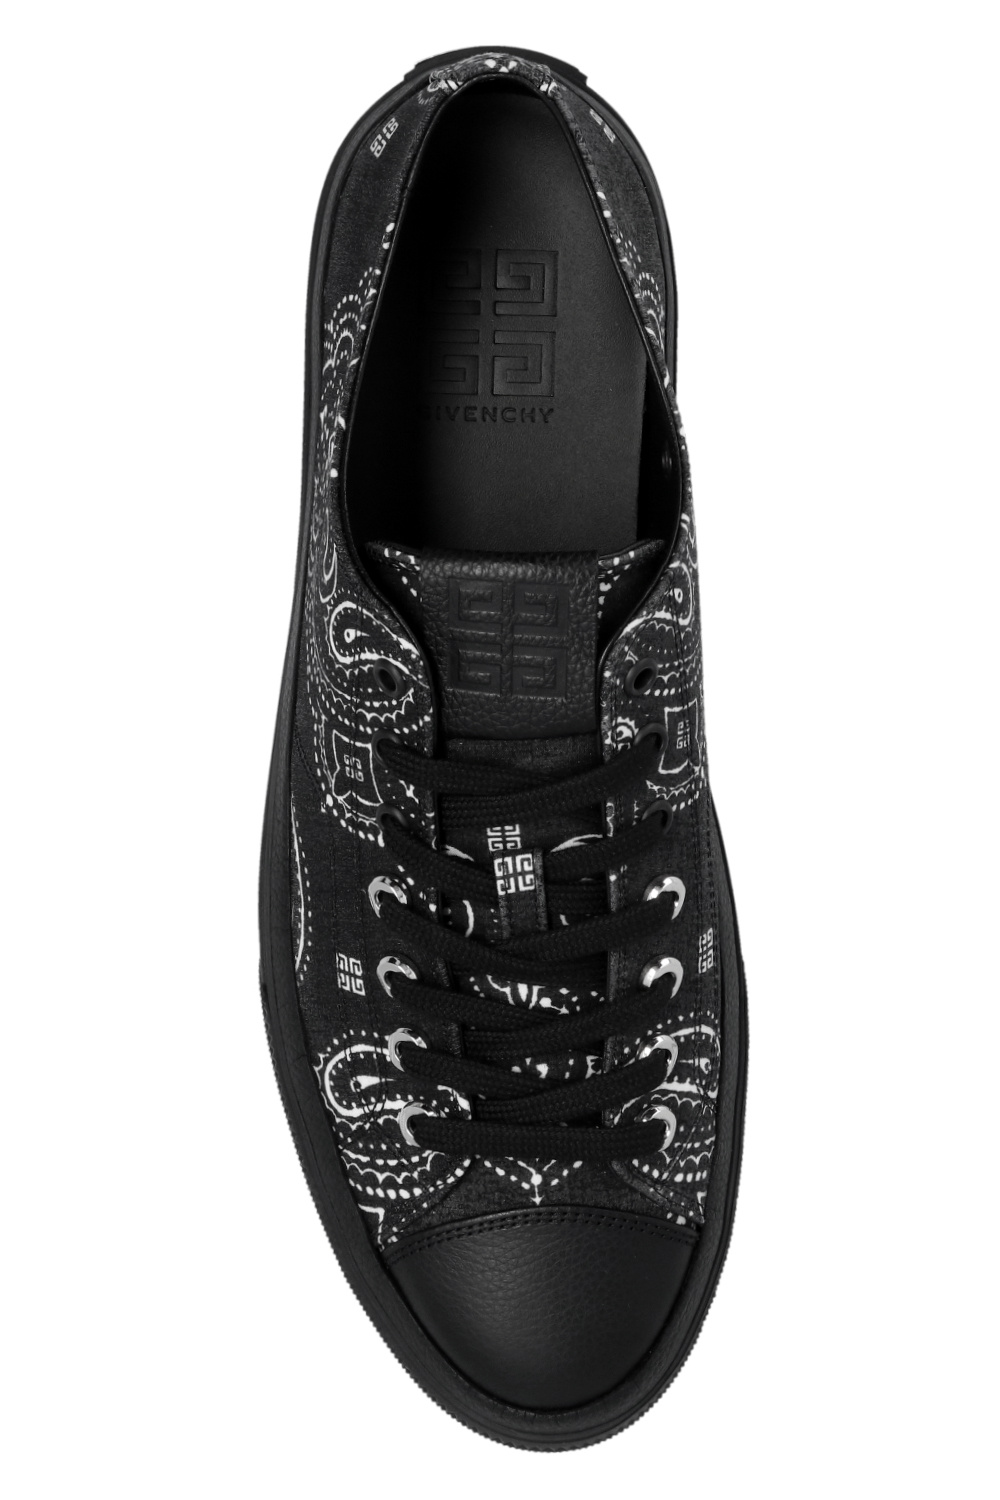 Givenchy ‘City Low’ sneakers